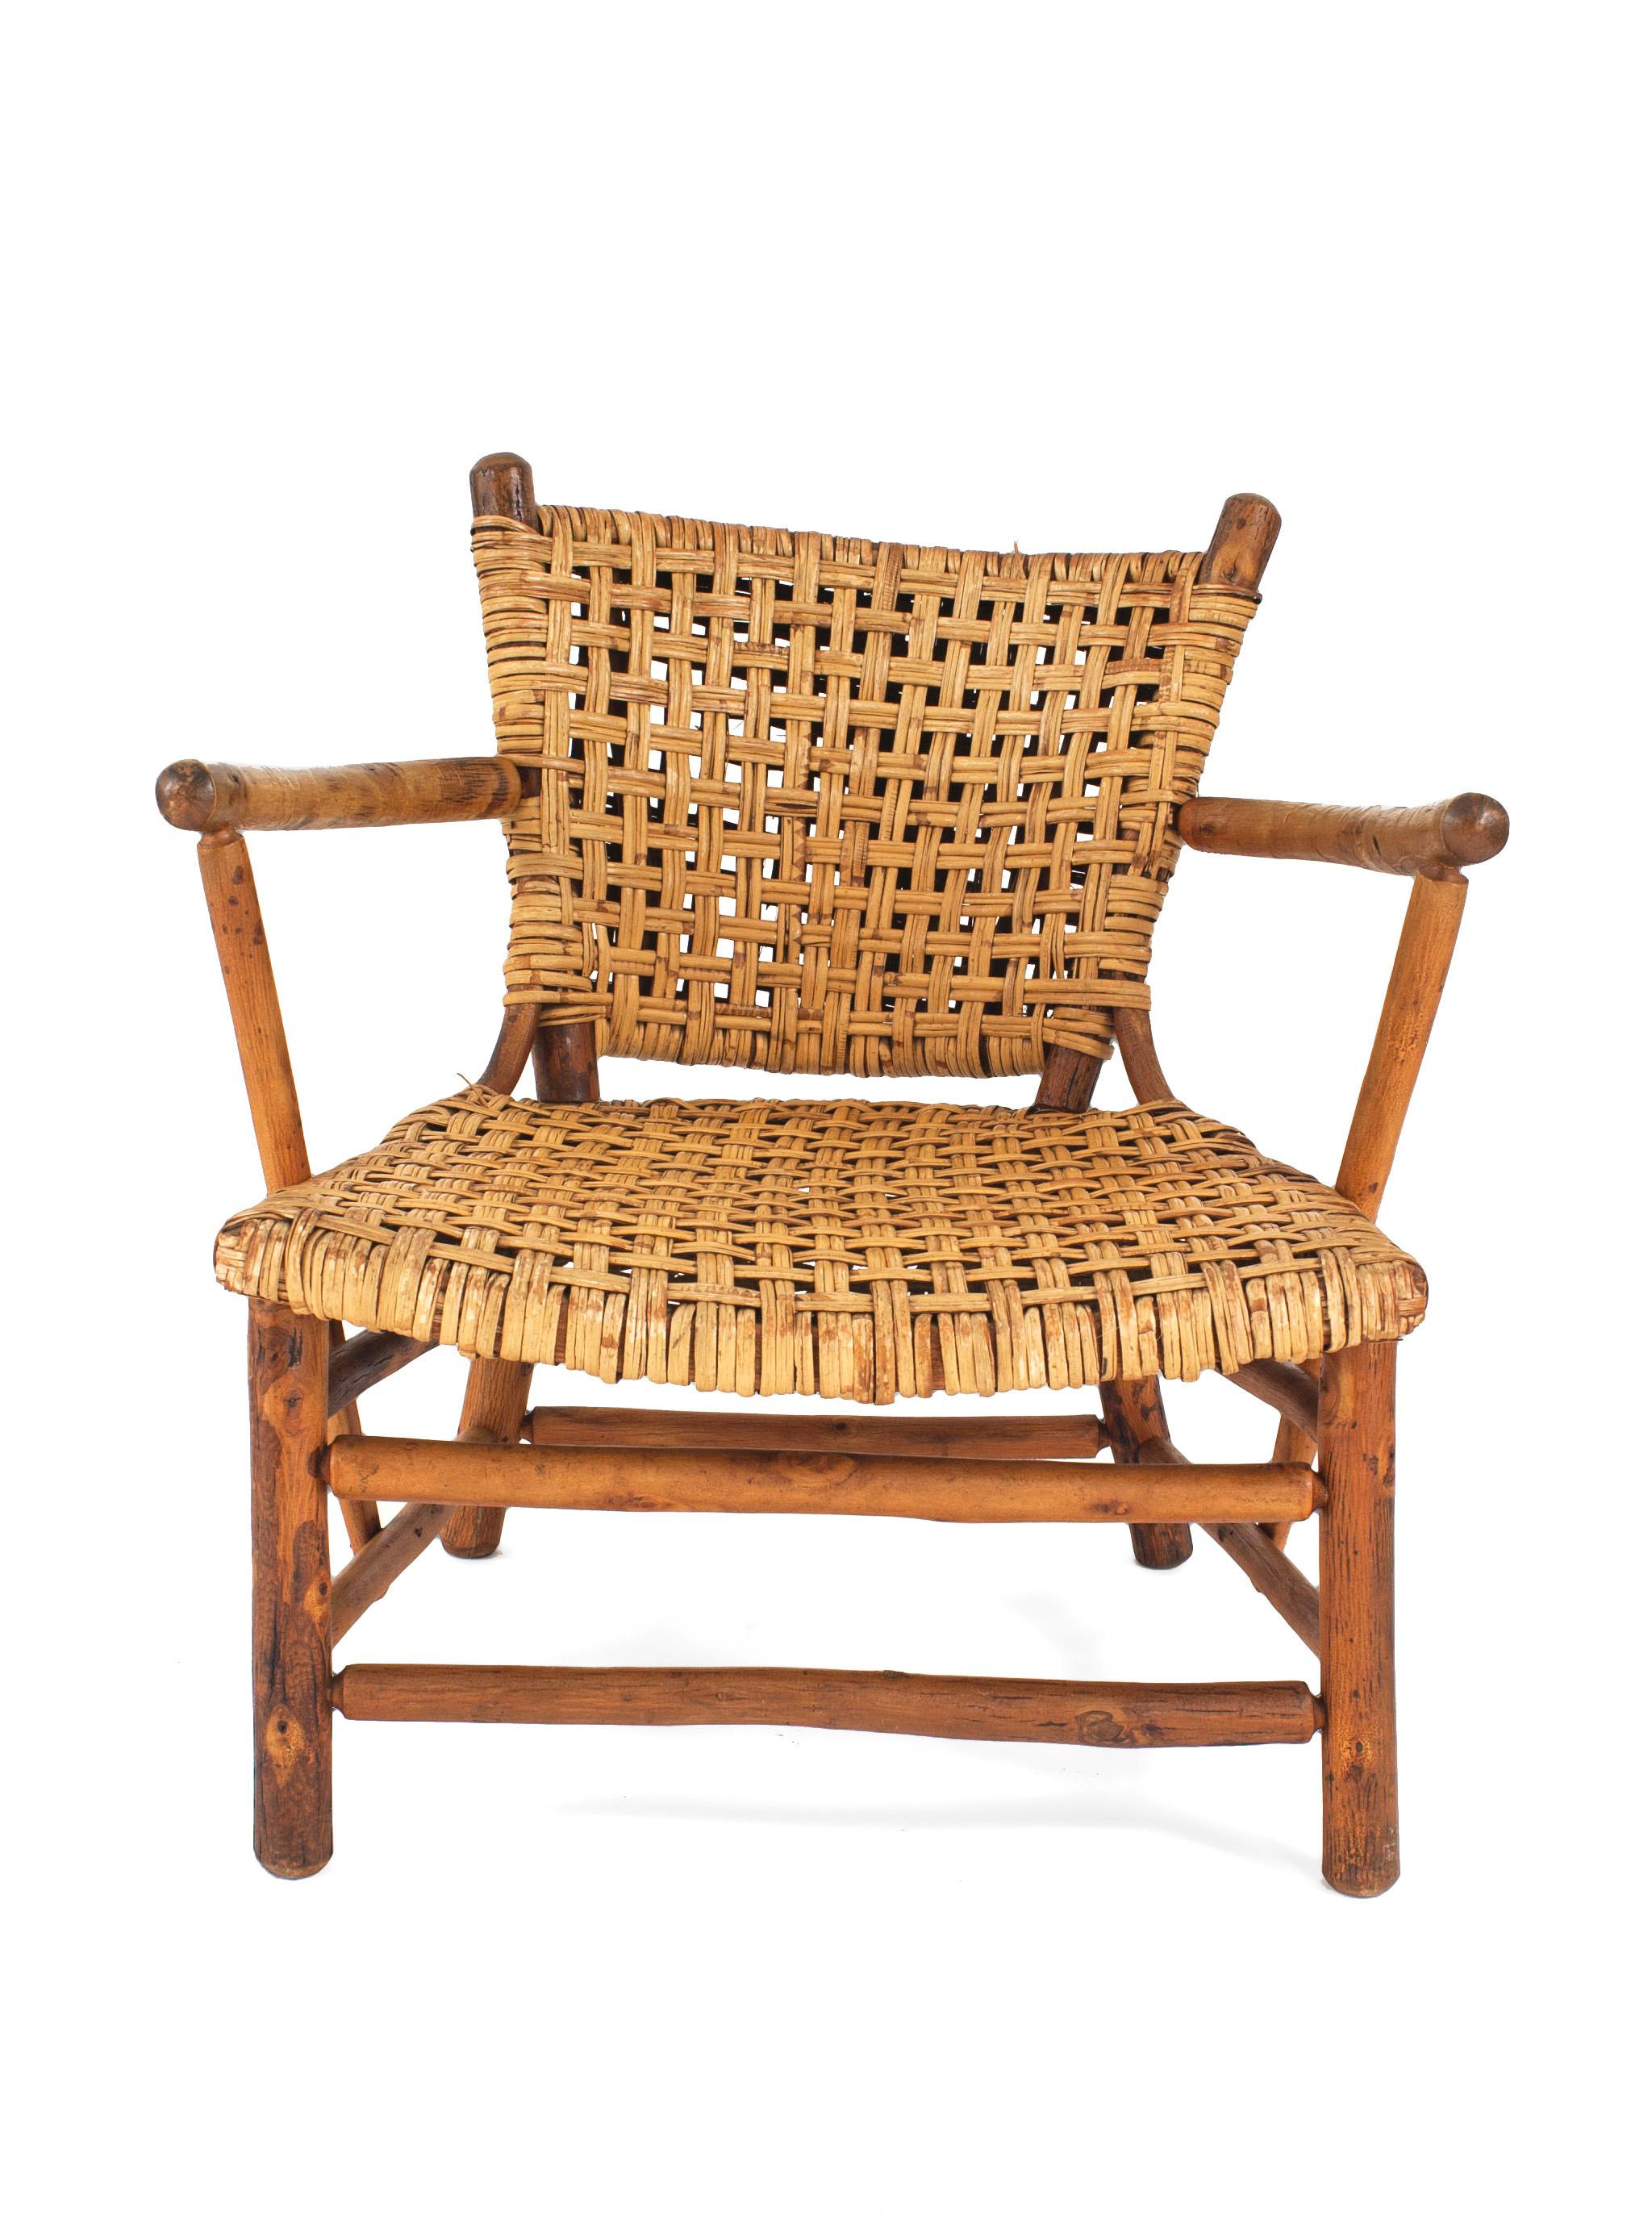 Pair of rustic old hickory low arm chairs with woven seats and backs.  See matching settee; dealer reference number 061005A.

Since 1899 Old Hickory Furniture has been handcrafted in Central Indiana using the remarkable hickory sapling and other